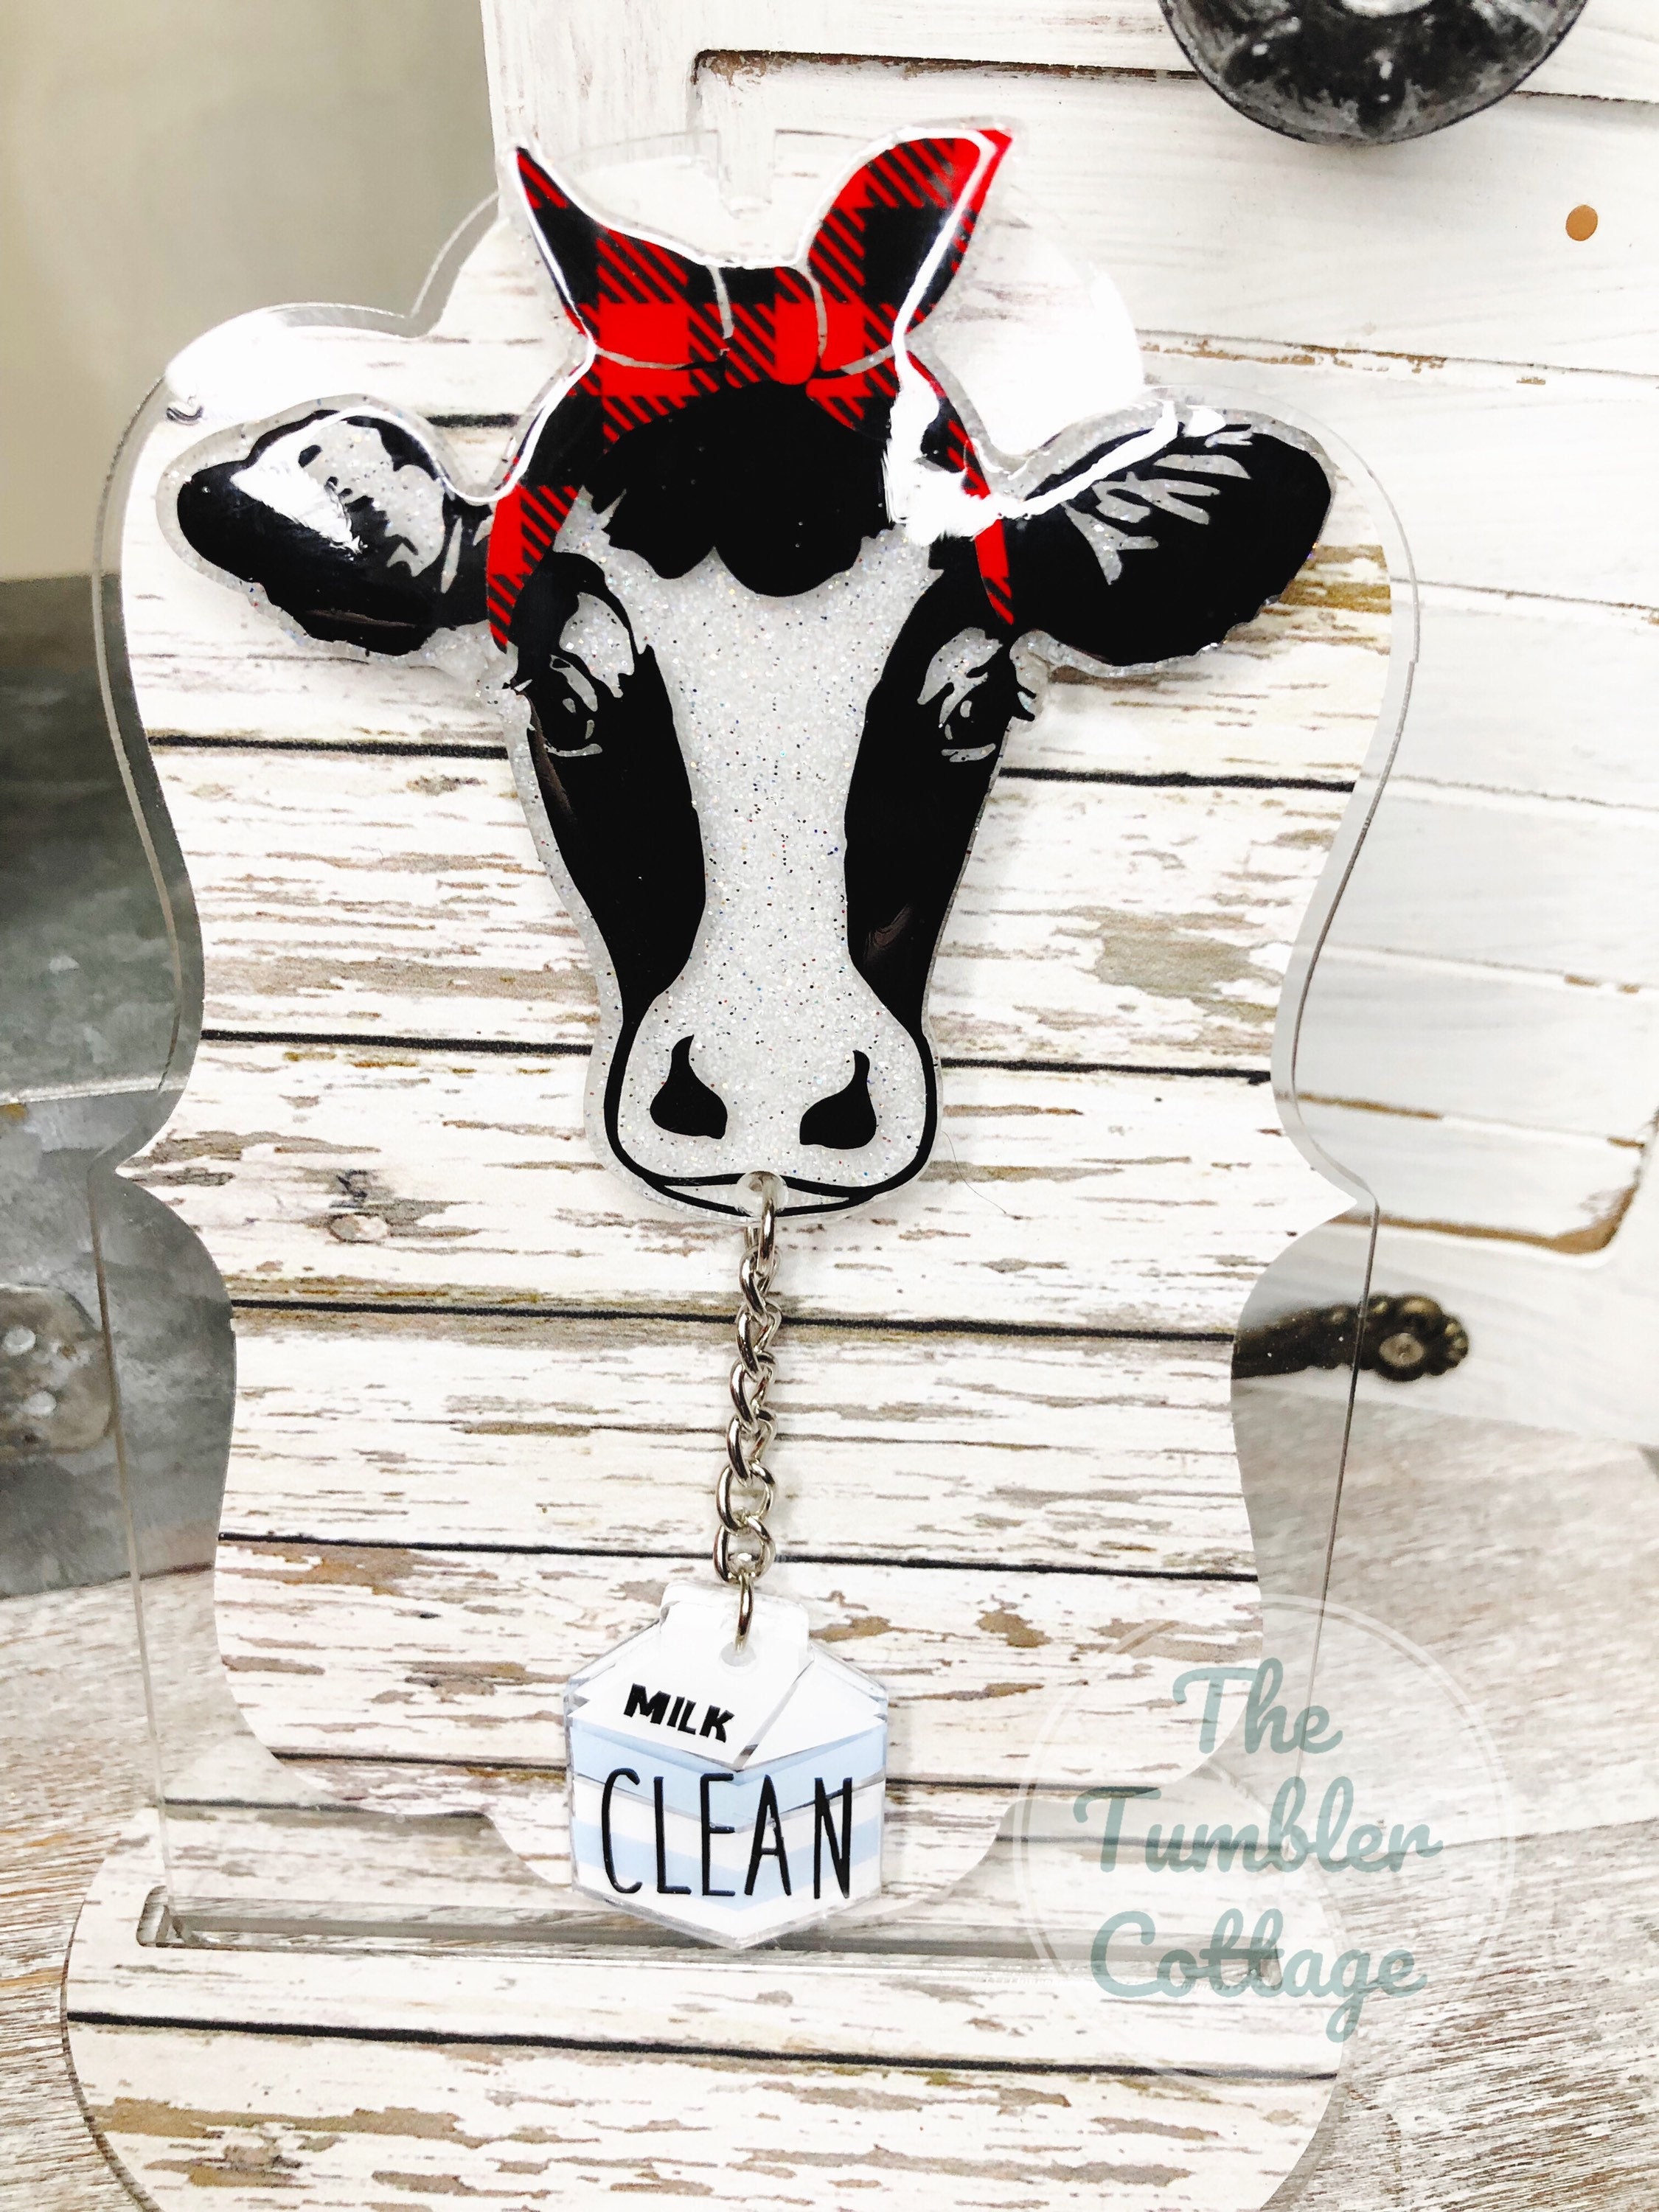 Cow Clean Dirty Dishwasher Magnet